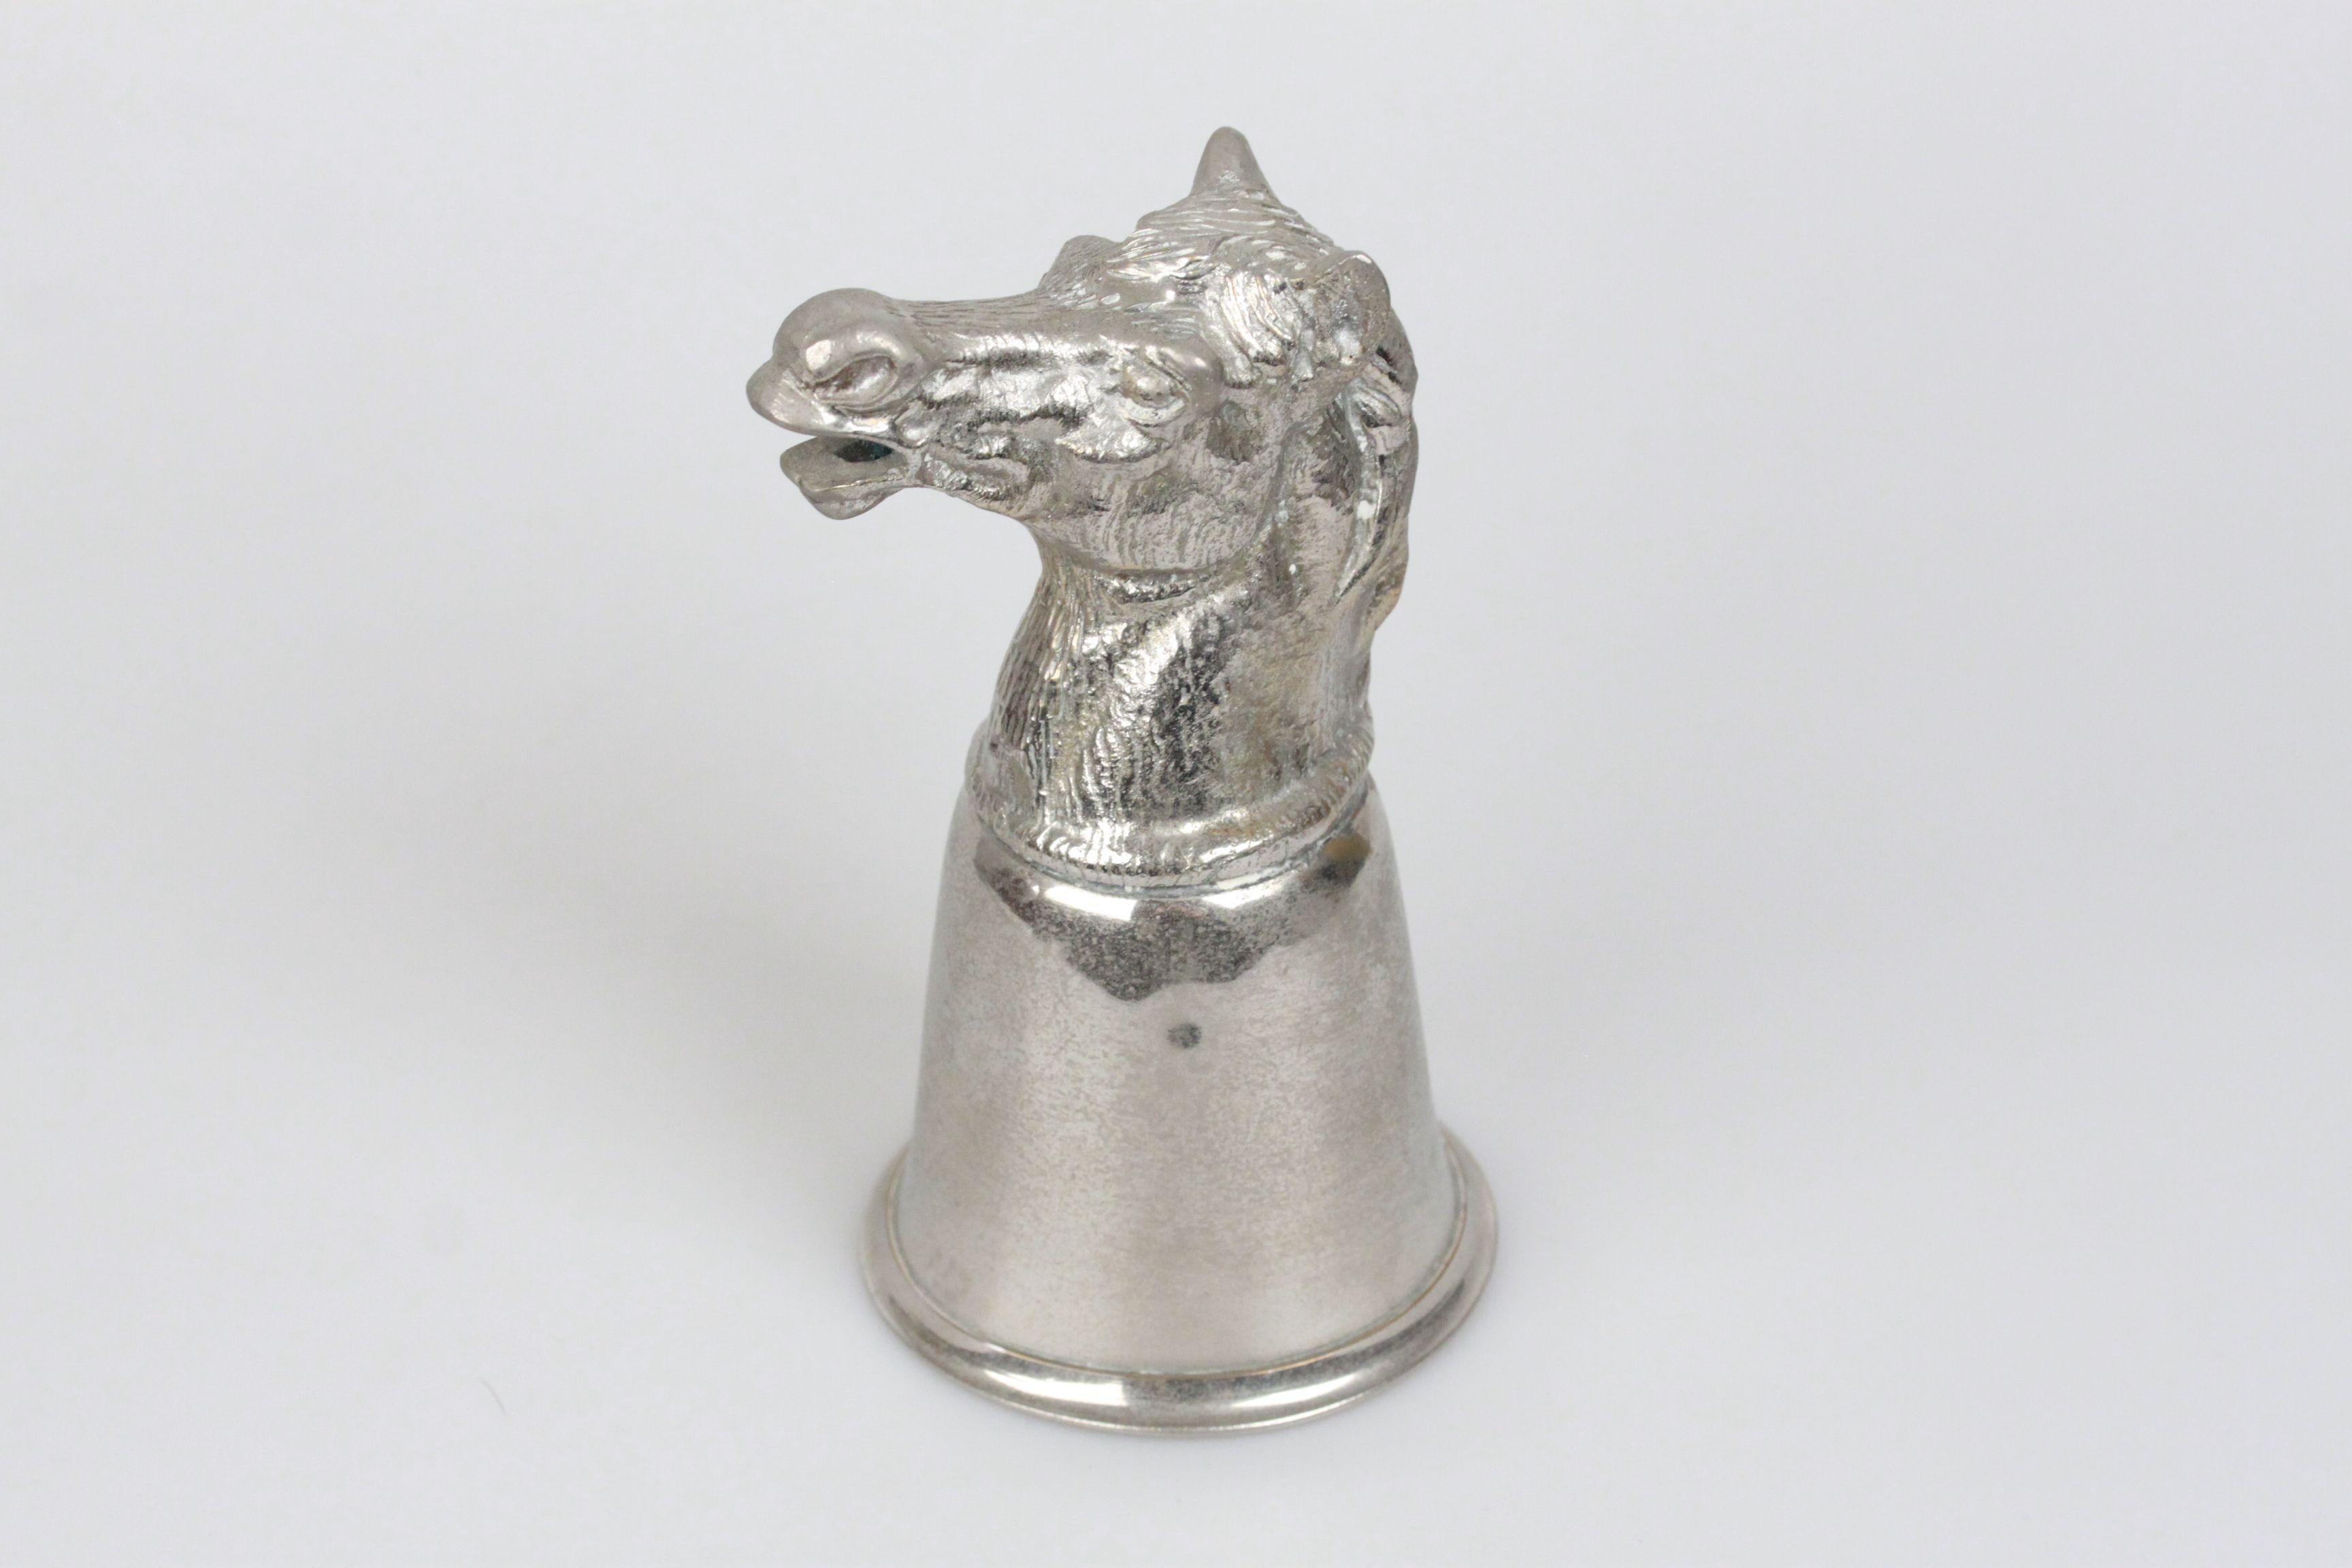 Vintage gucci horse head cup from the 70s - Silver metal - They can sit safely either way up or down - Horse, Hare, Hound Fox, Boar and Stag - Marked GUCCI ITALY - Height: 5.5 inches - 14 cm - Cup's diameter: 3 inches - 7,6 cm